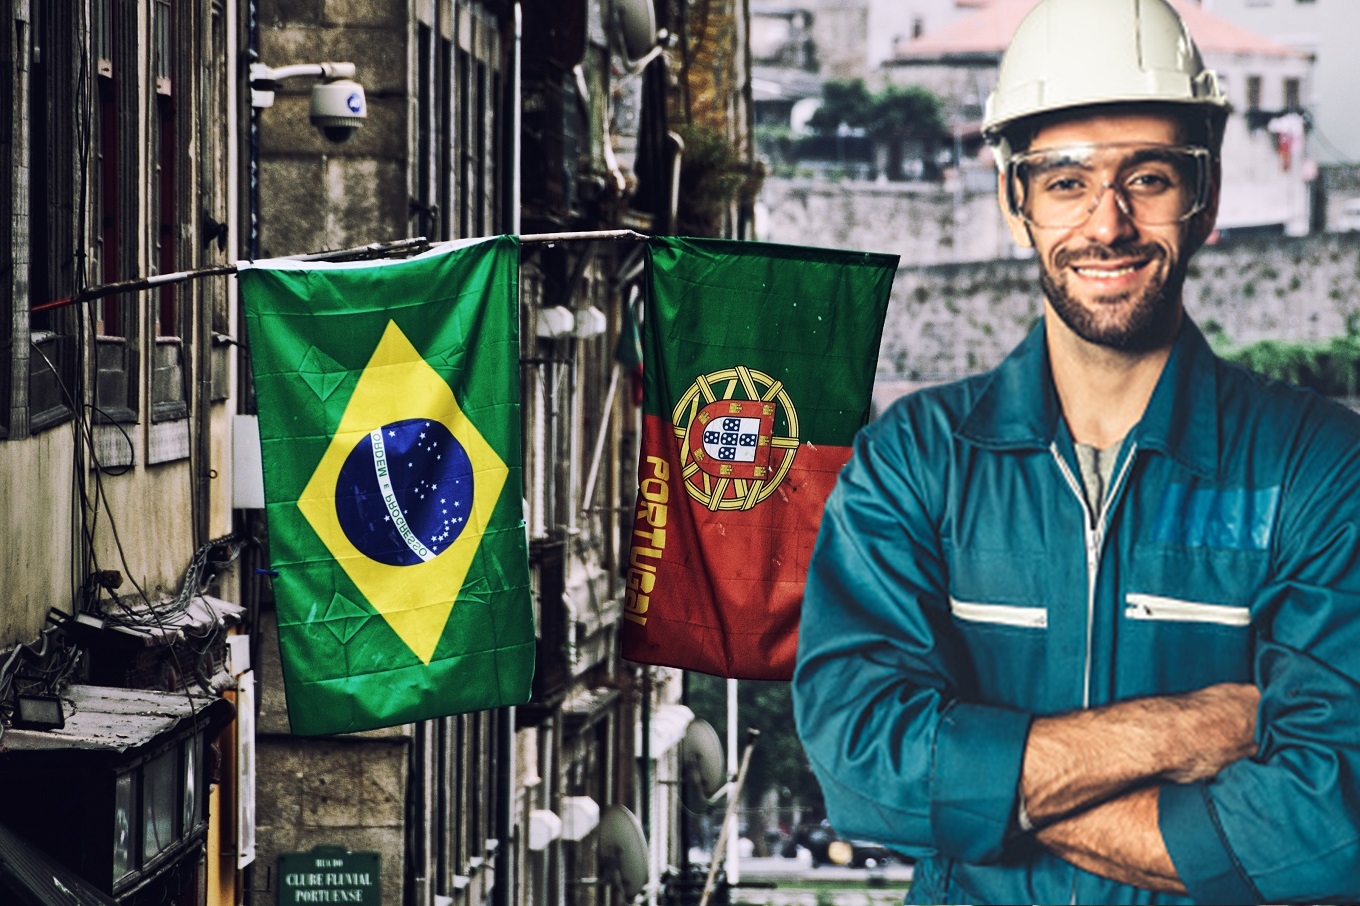 Portugal and Brazil have an economic relationship and job vacancies for Brazilians and Portuguese in their countries